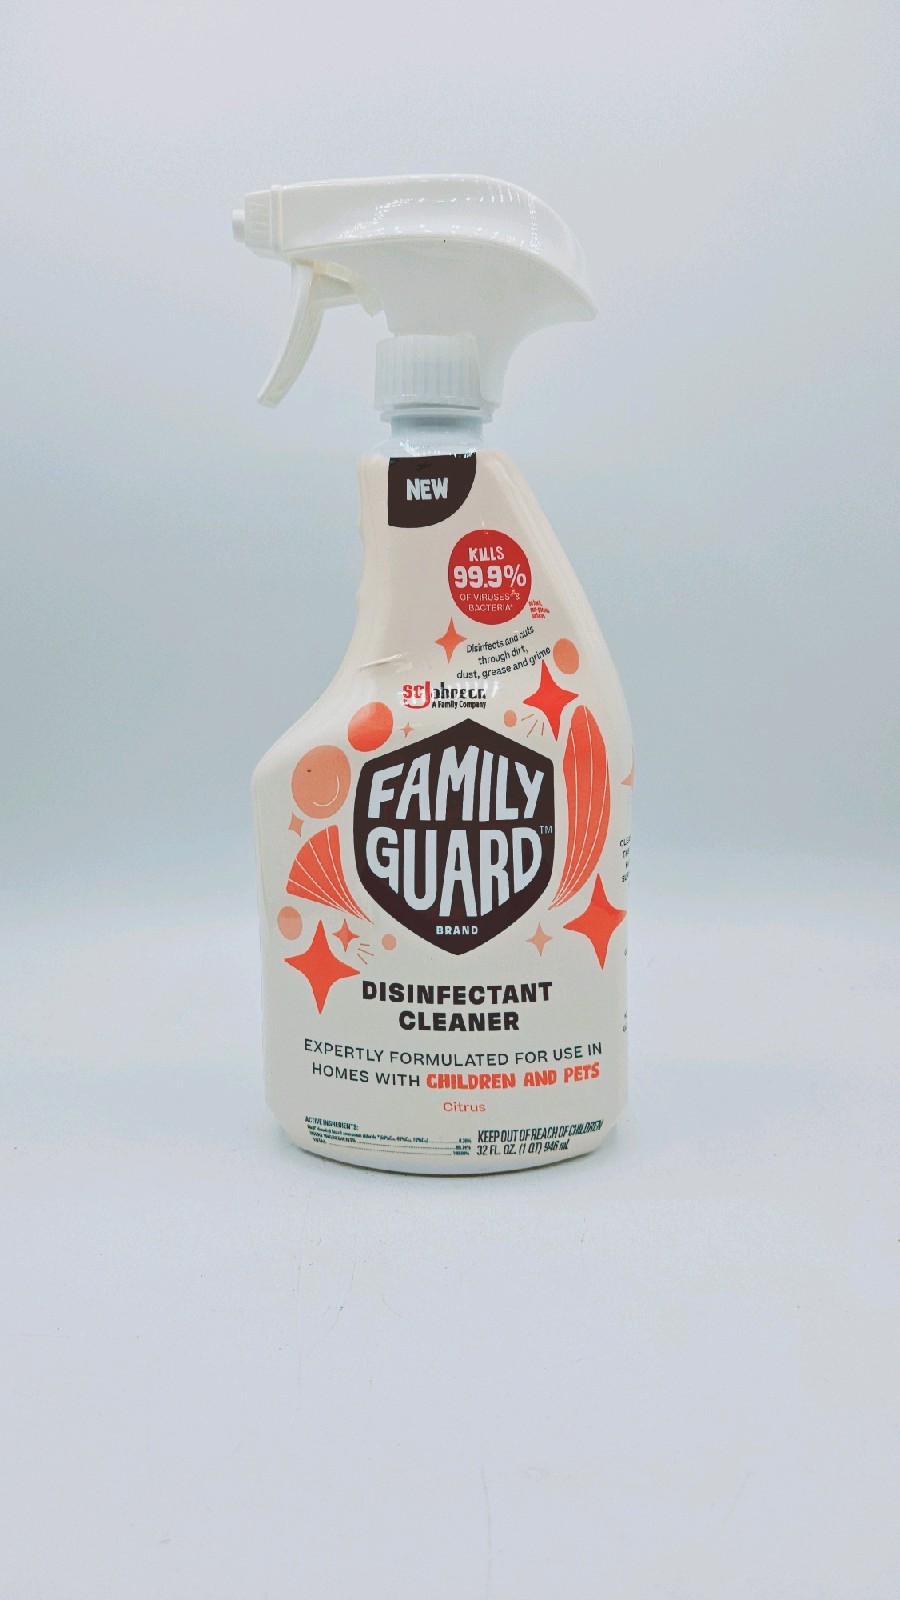 Guard Disinfectant Cleaner